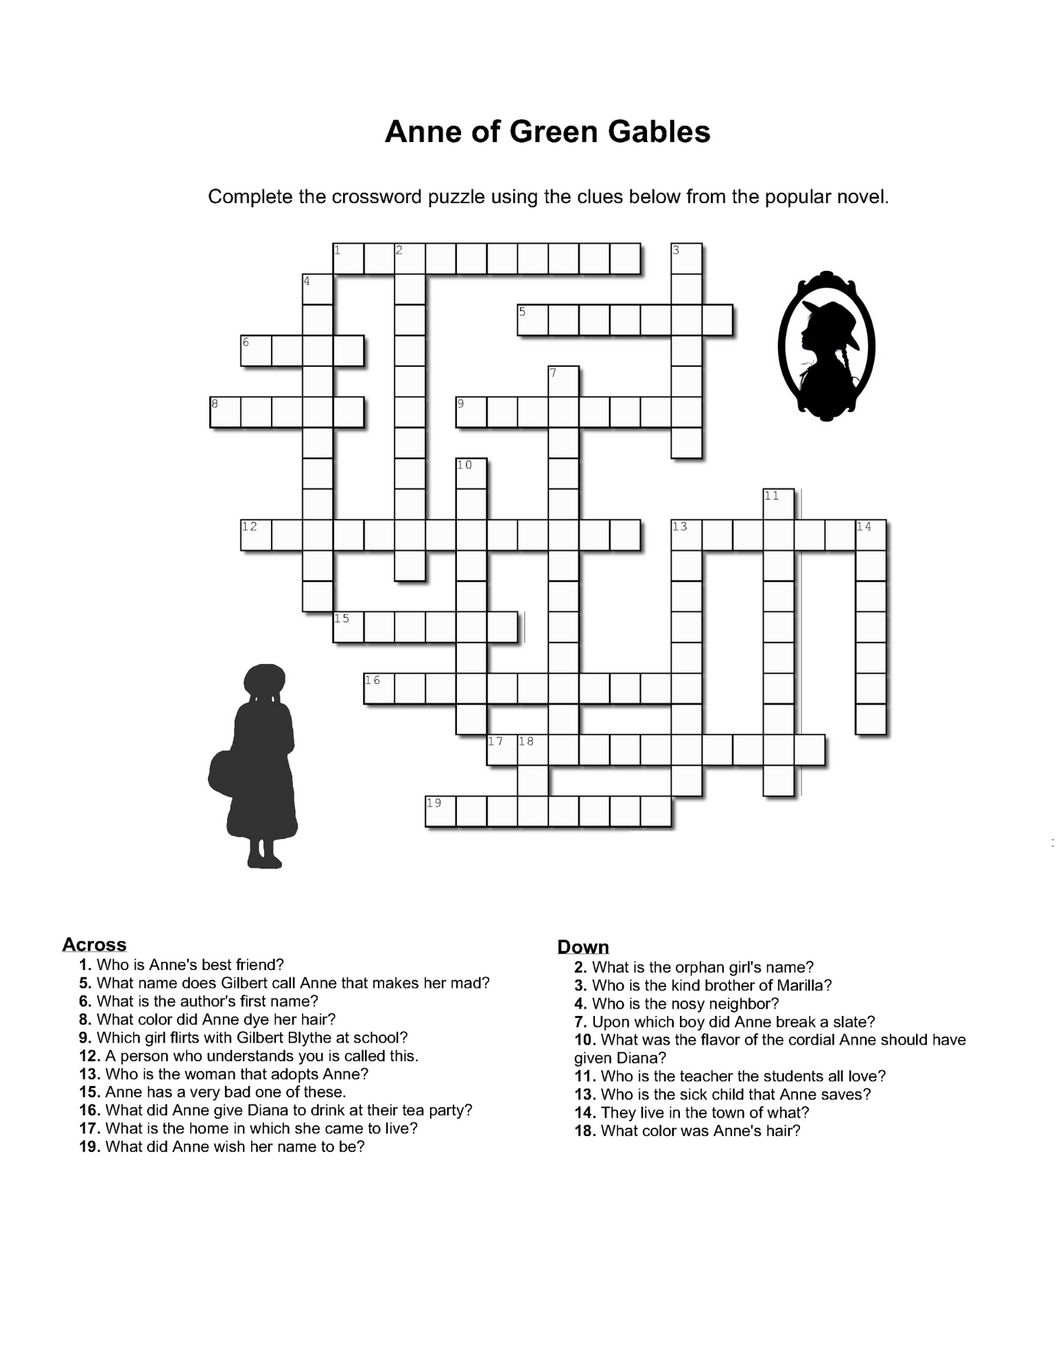 Anne of Green Gables Crossword Puzzle - Digital Download